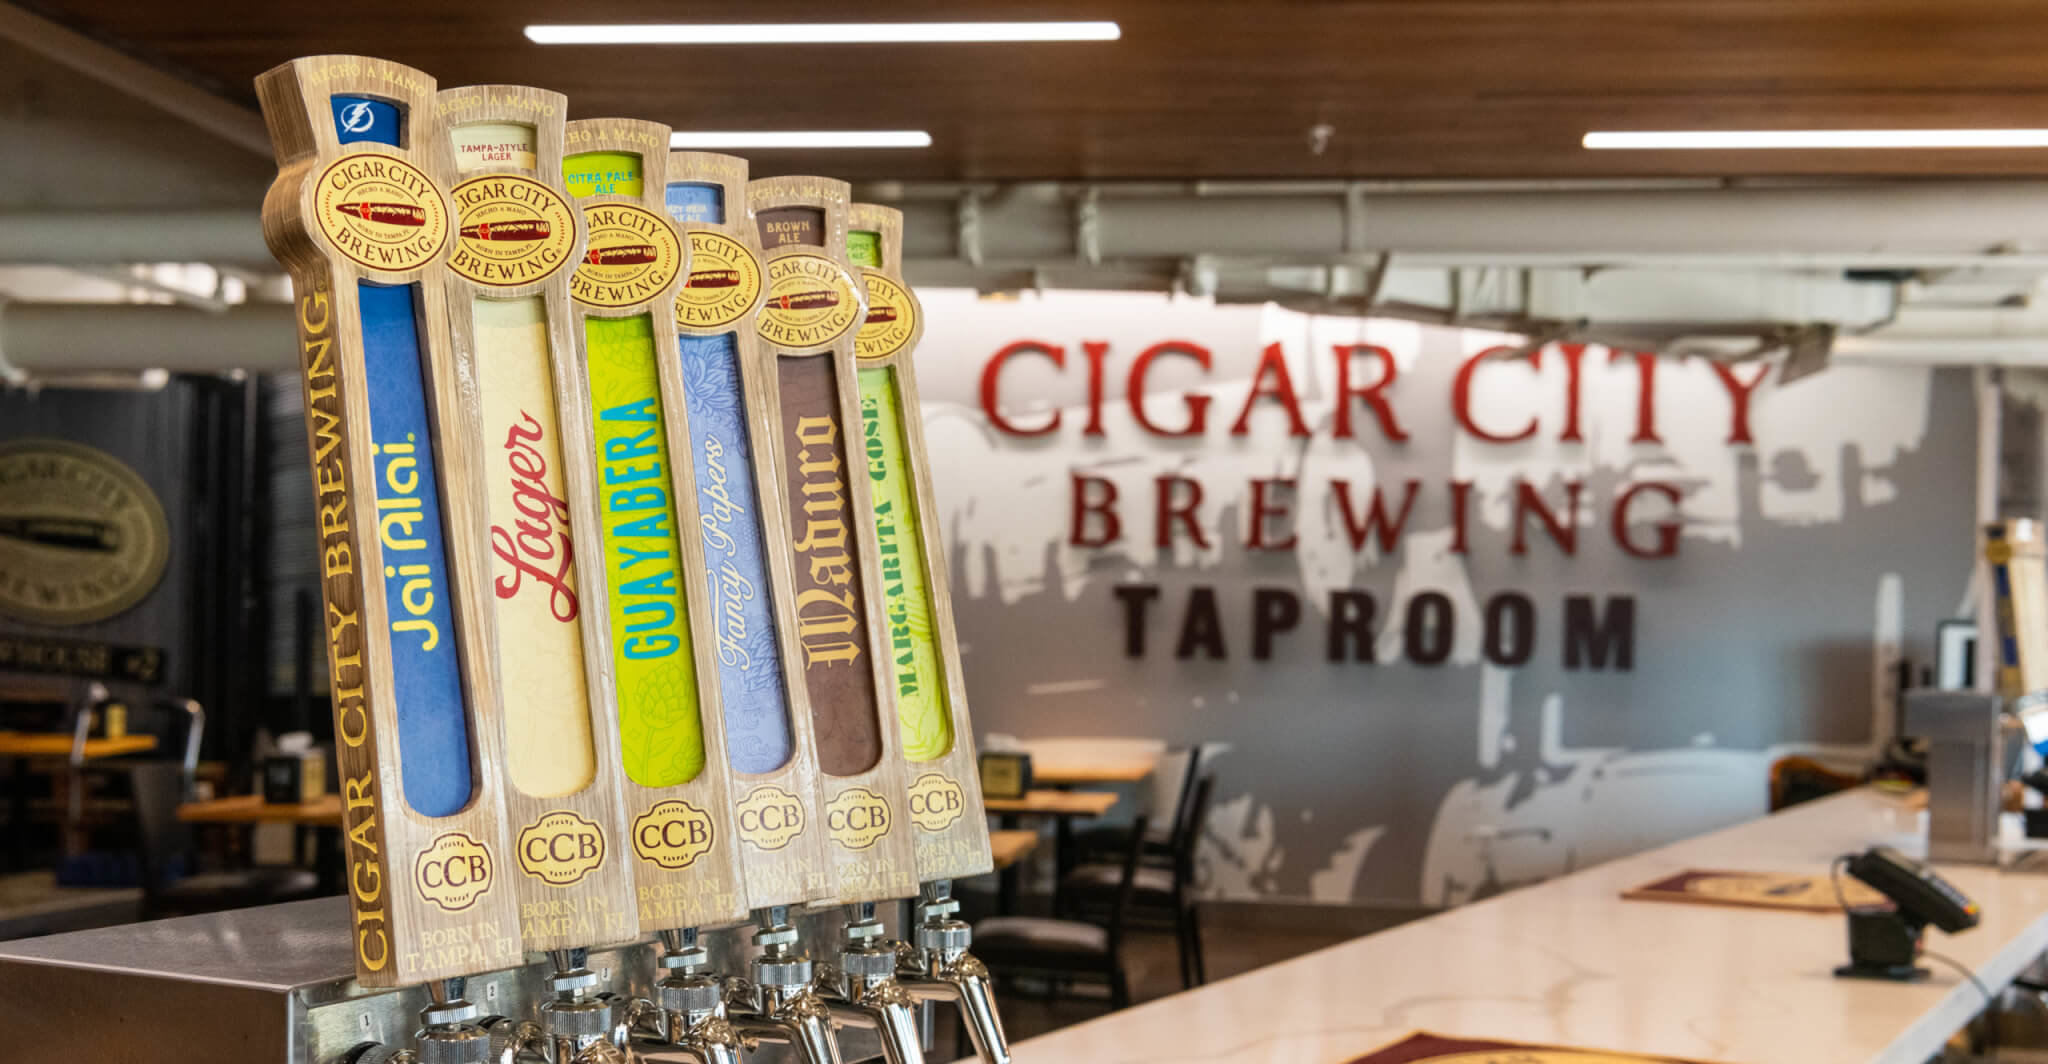 Featuring a taproom with a full bar and kitchen, the Taproom Downtown creates an authentic Tampa setting, enhancing the pre and post-event experience for AMALIE Arena guests and Lightning fans.